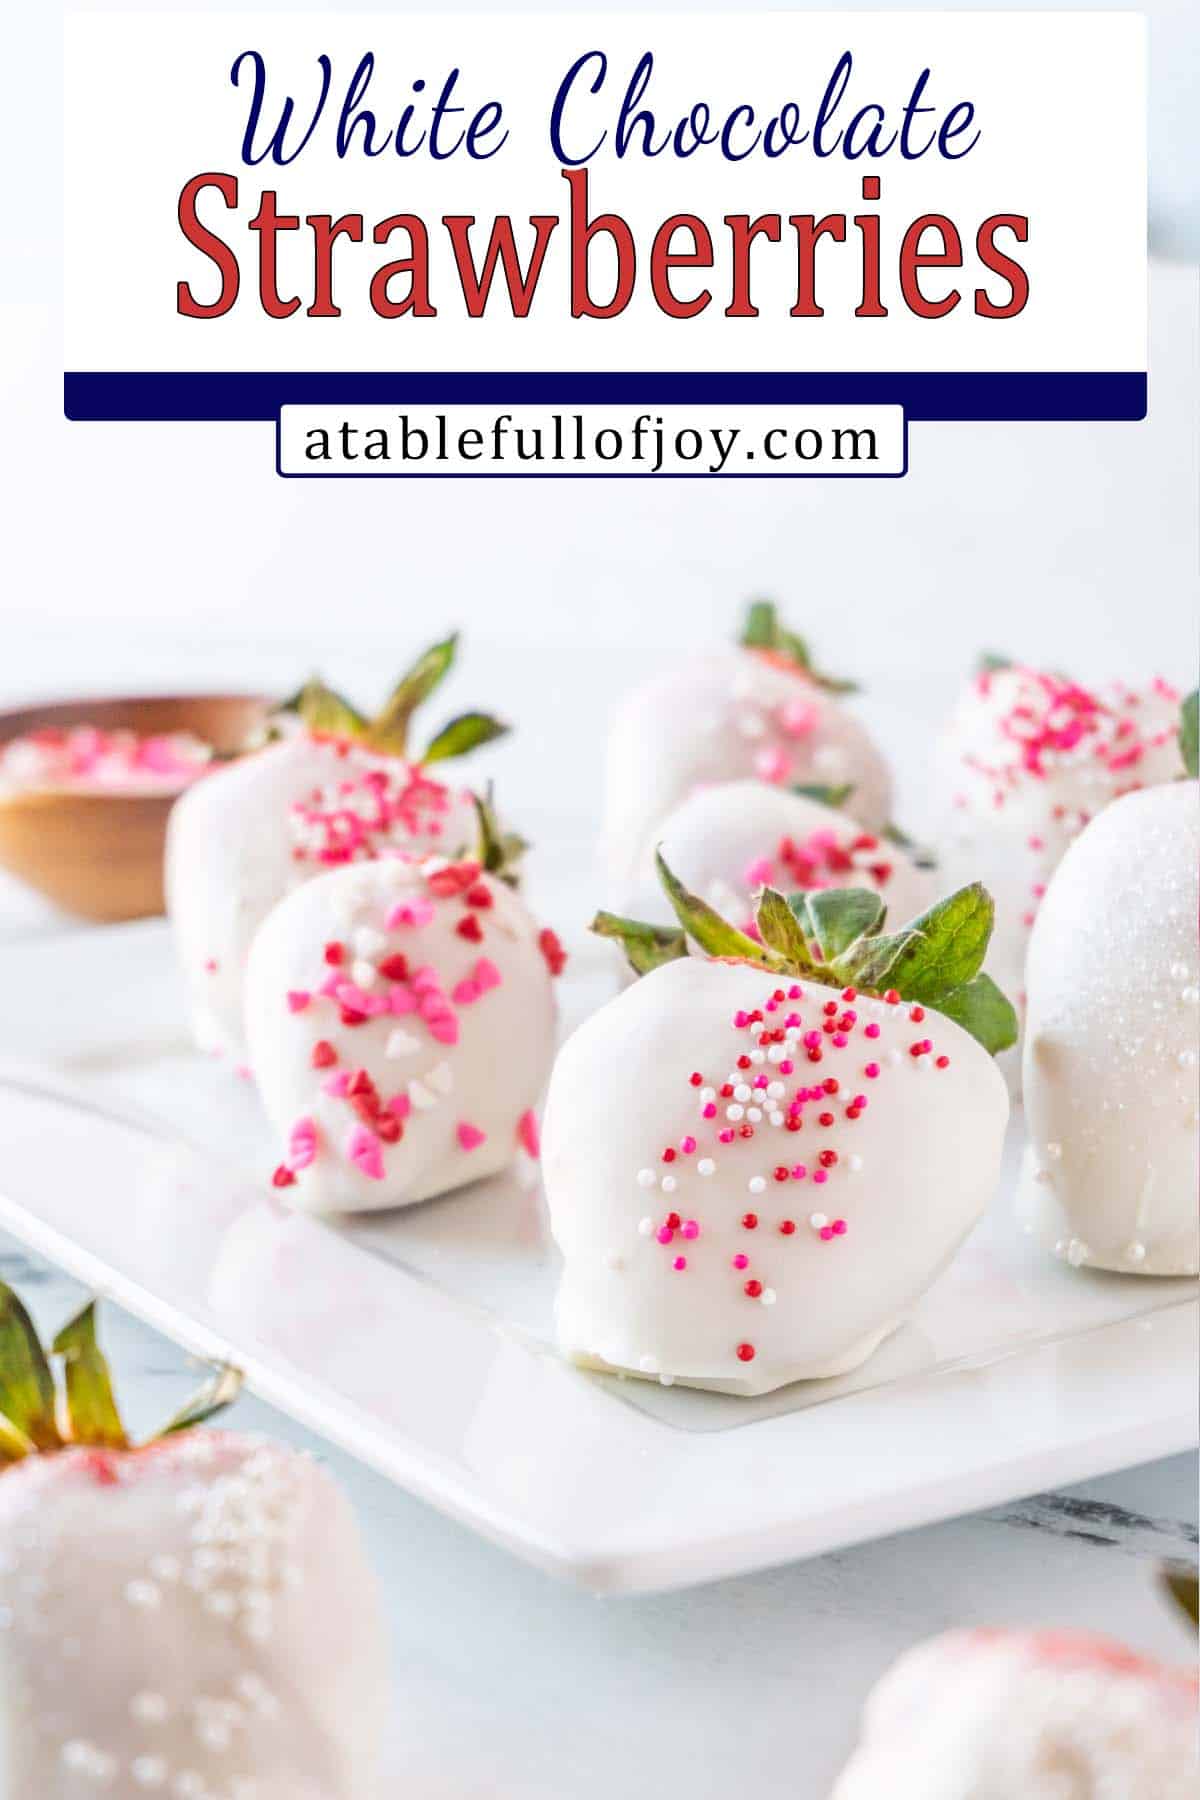 white chocolate covered strawberries on plate pinterest pin